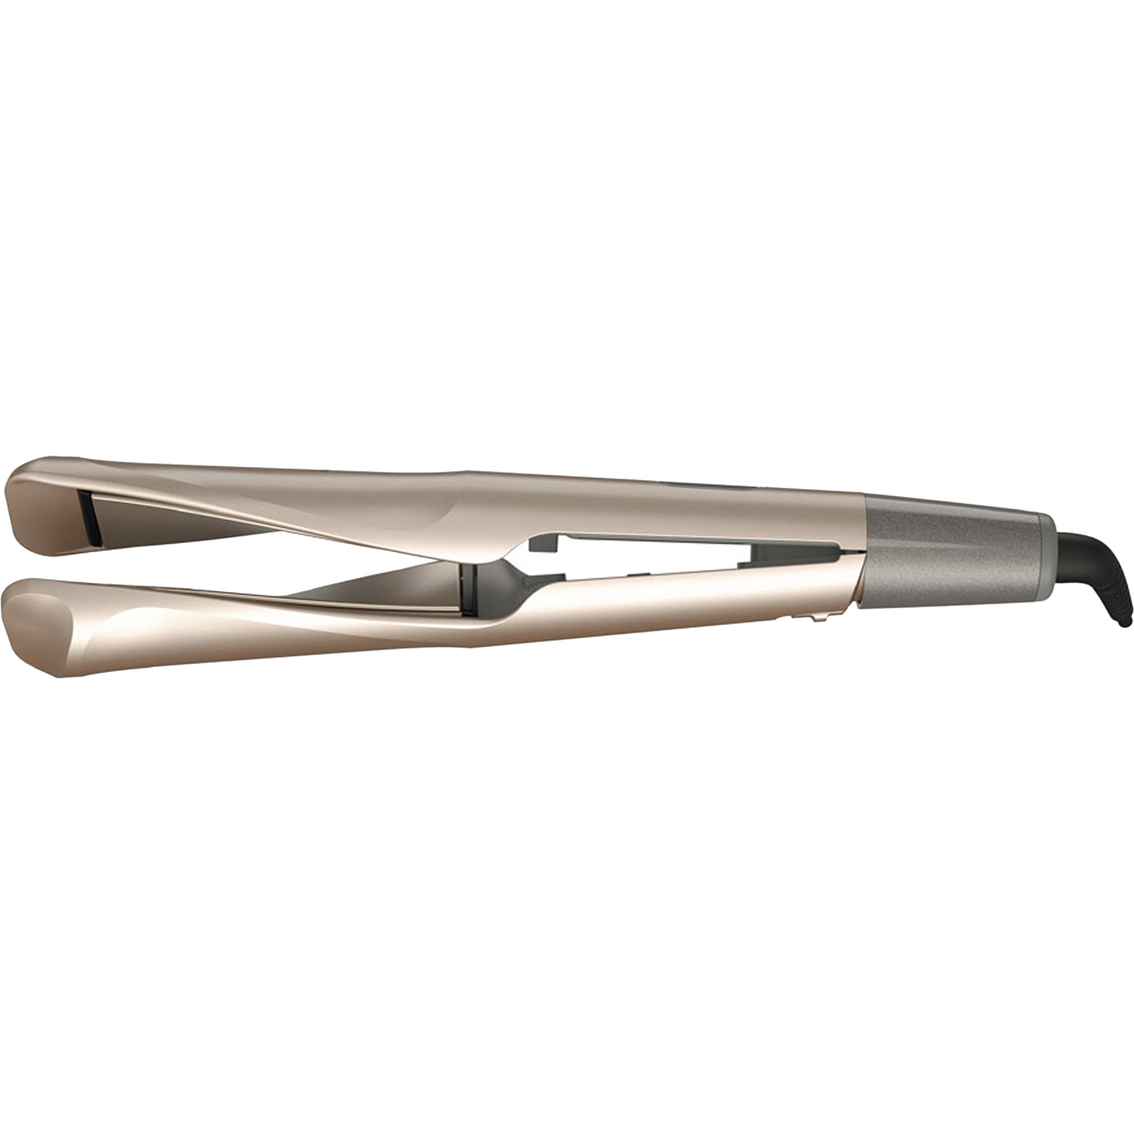 Remington Pro 1 in. Multi Styler with Twist & Curl Technology - Image 2 of 7